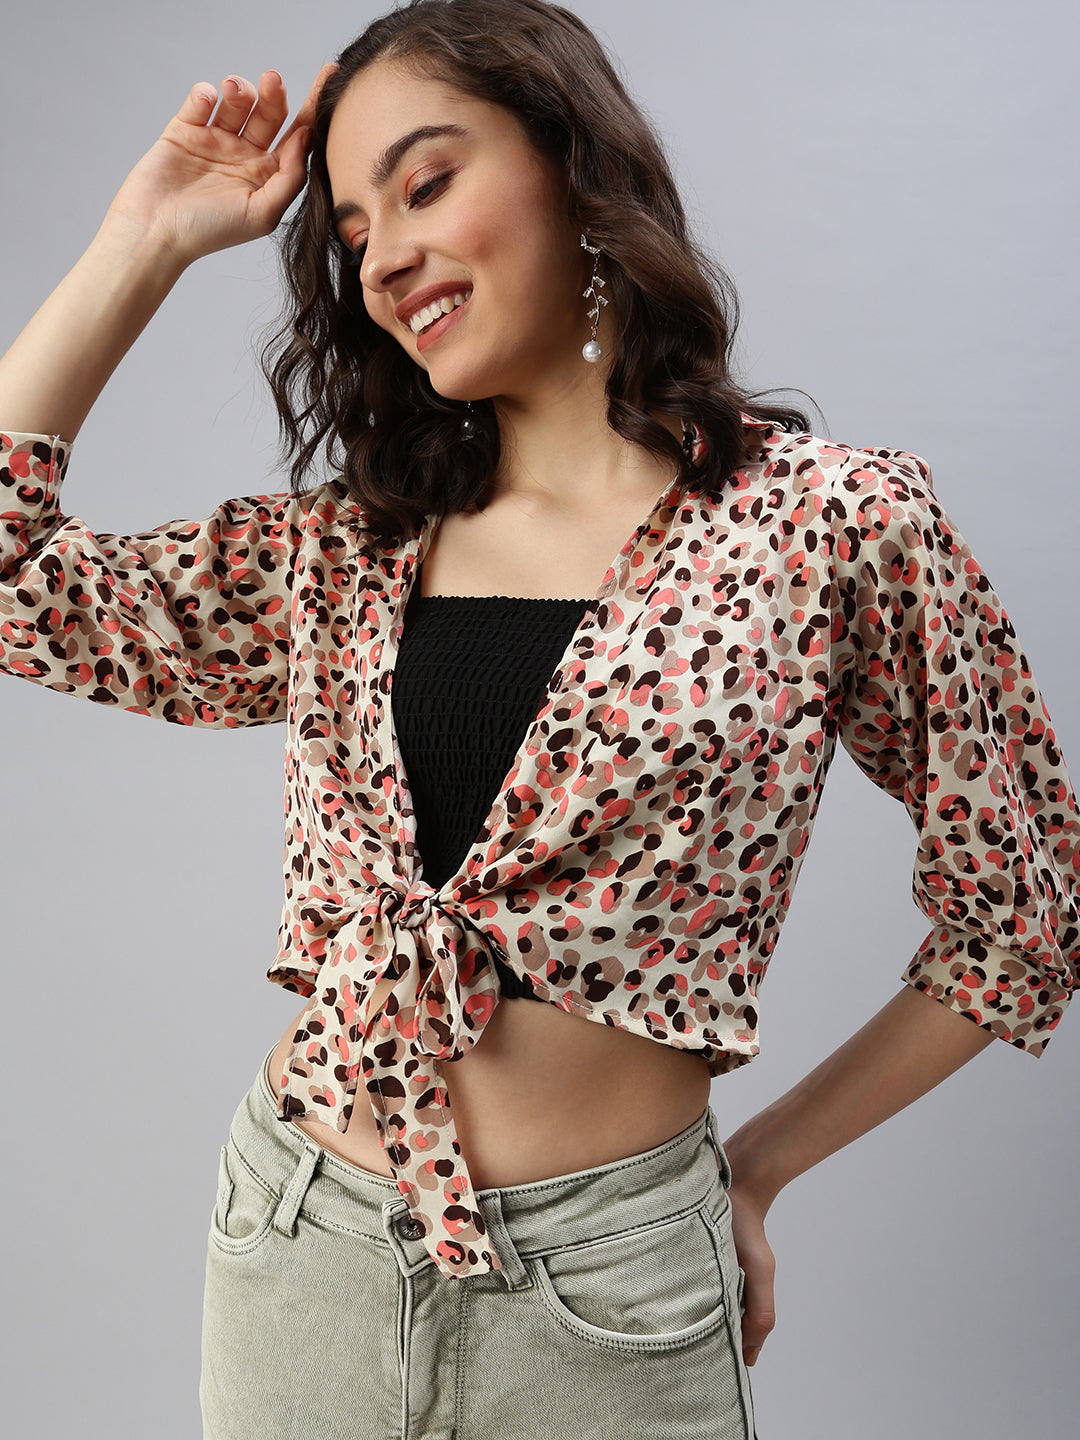 Women Shirt Collar Printed Beige Fitted Top